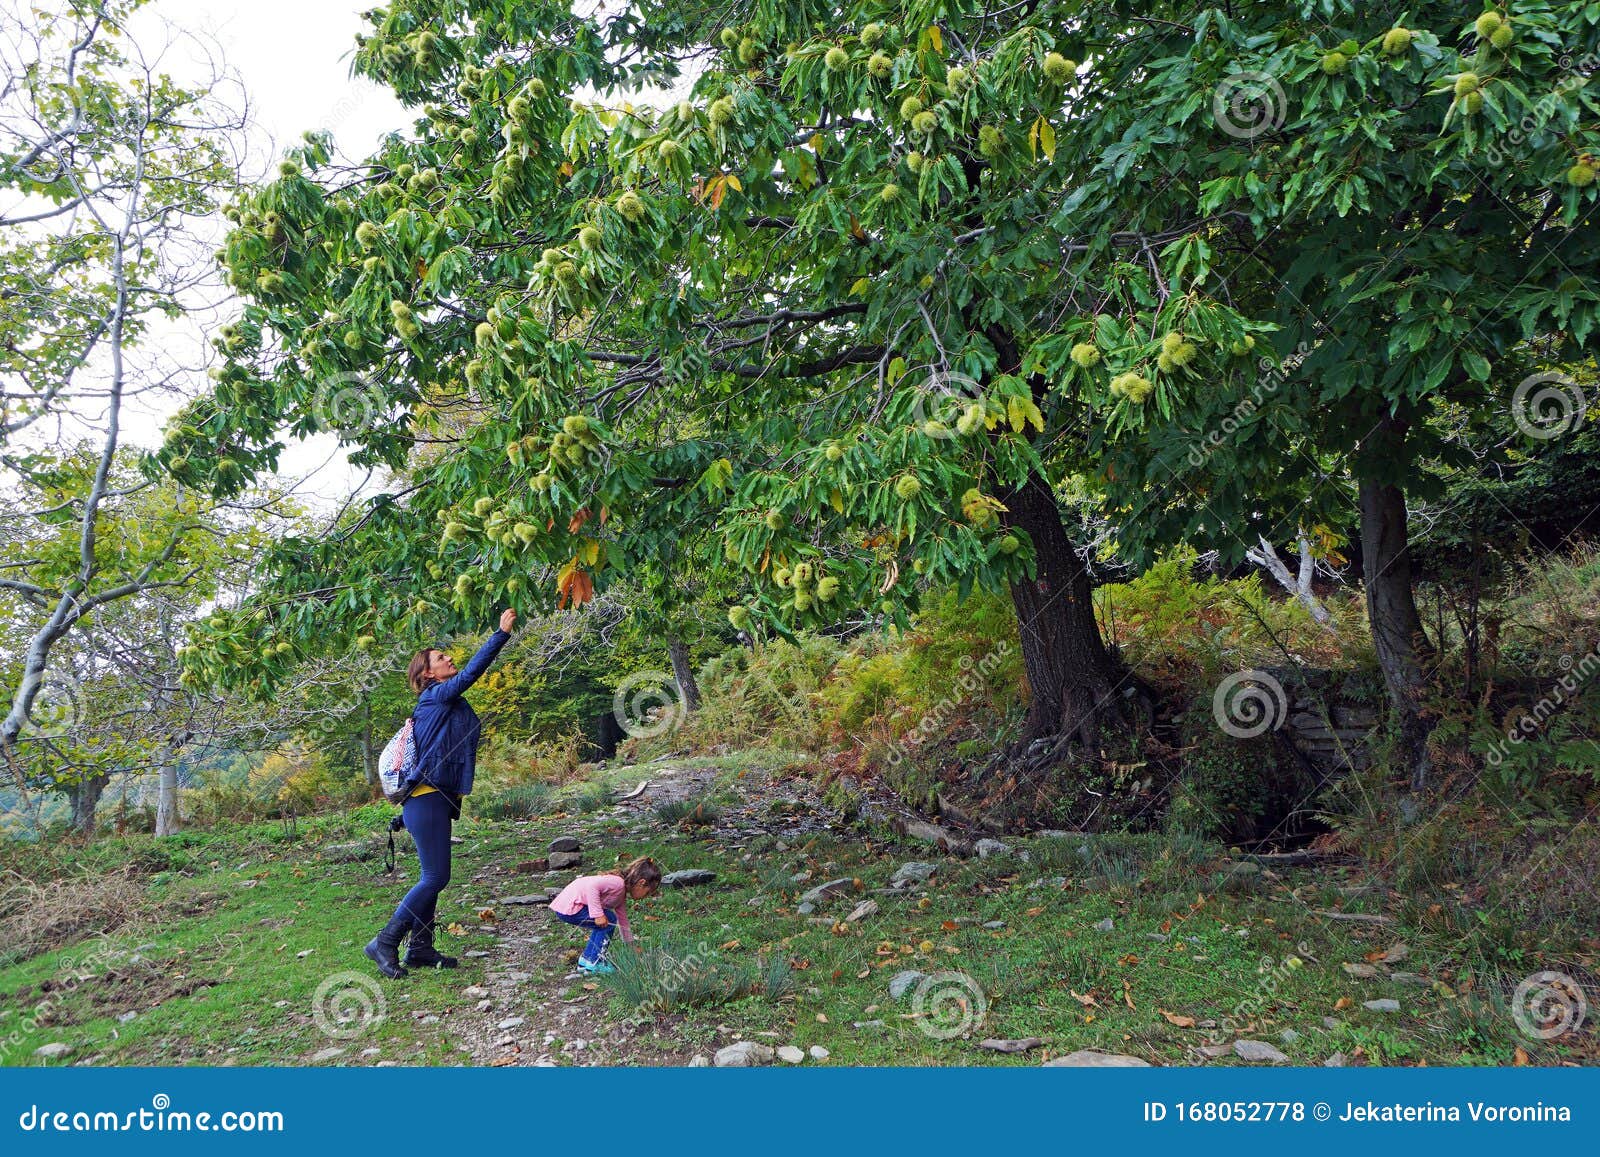 chestnut harvest in the pelion woods, a mountain in the south-eastern part of thessaly